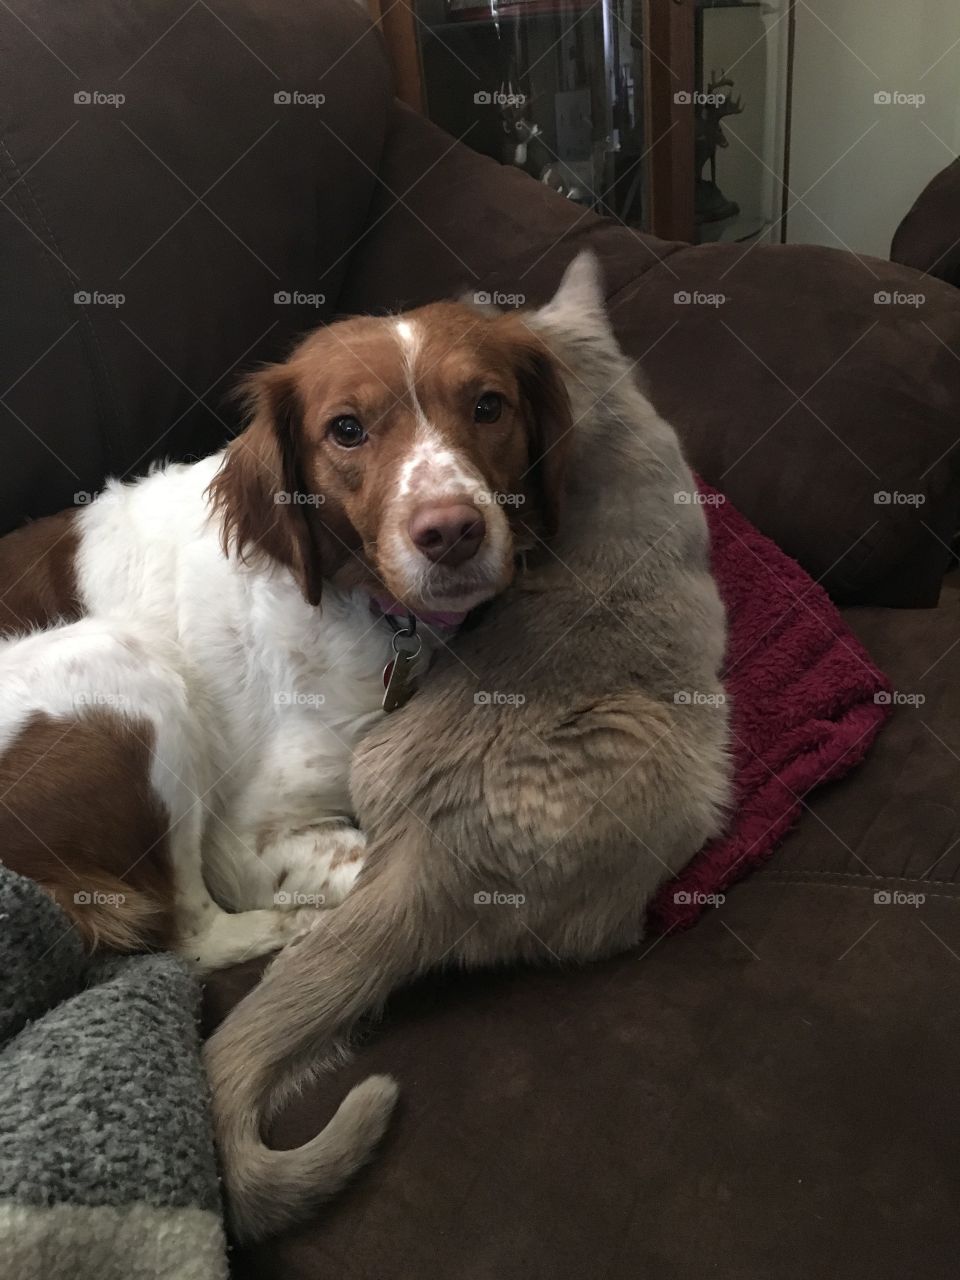 Puppy and kitty love